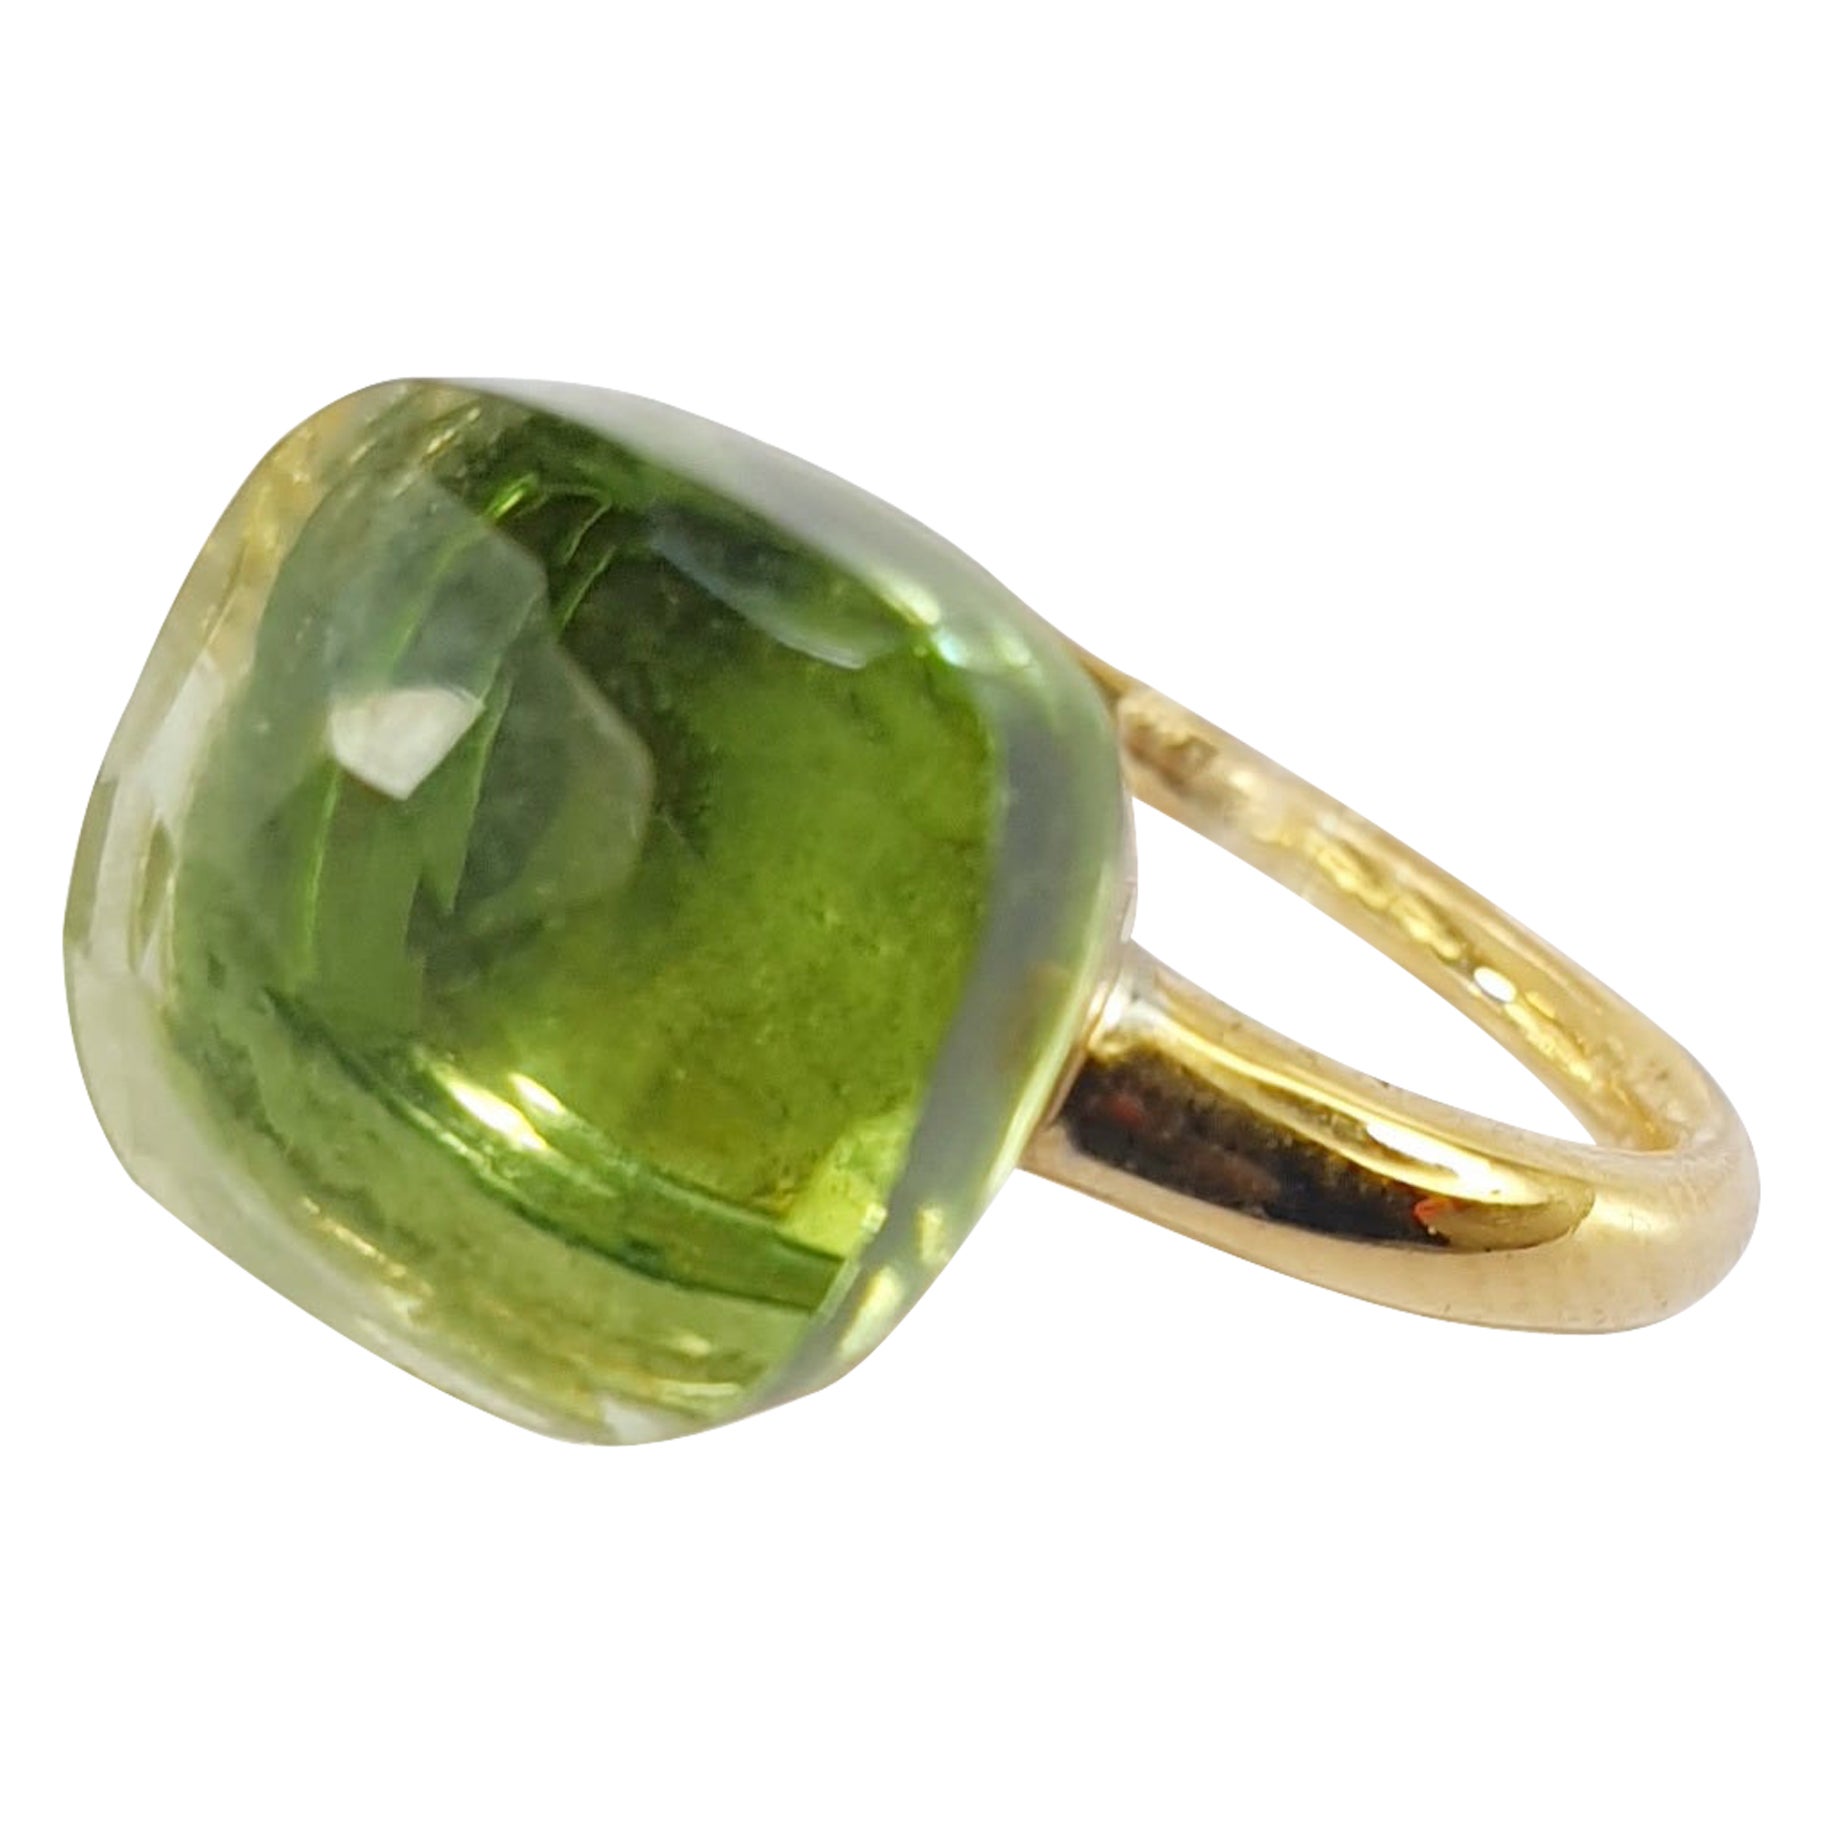 Multifaceted Green Eden Quartz 18K White and Yellow Gold Fashion Ring